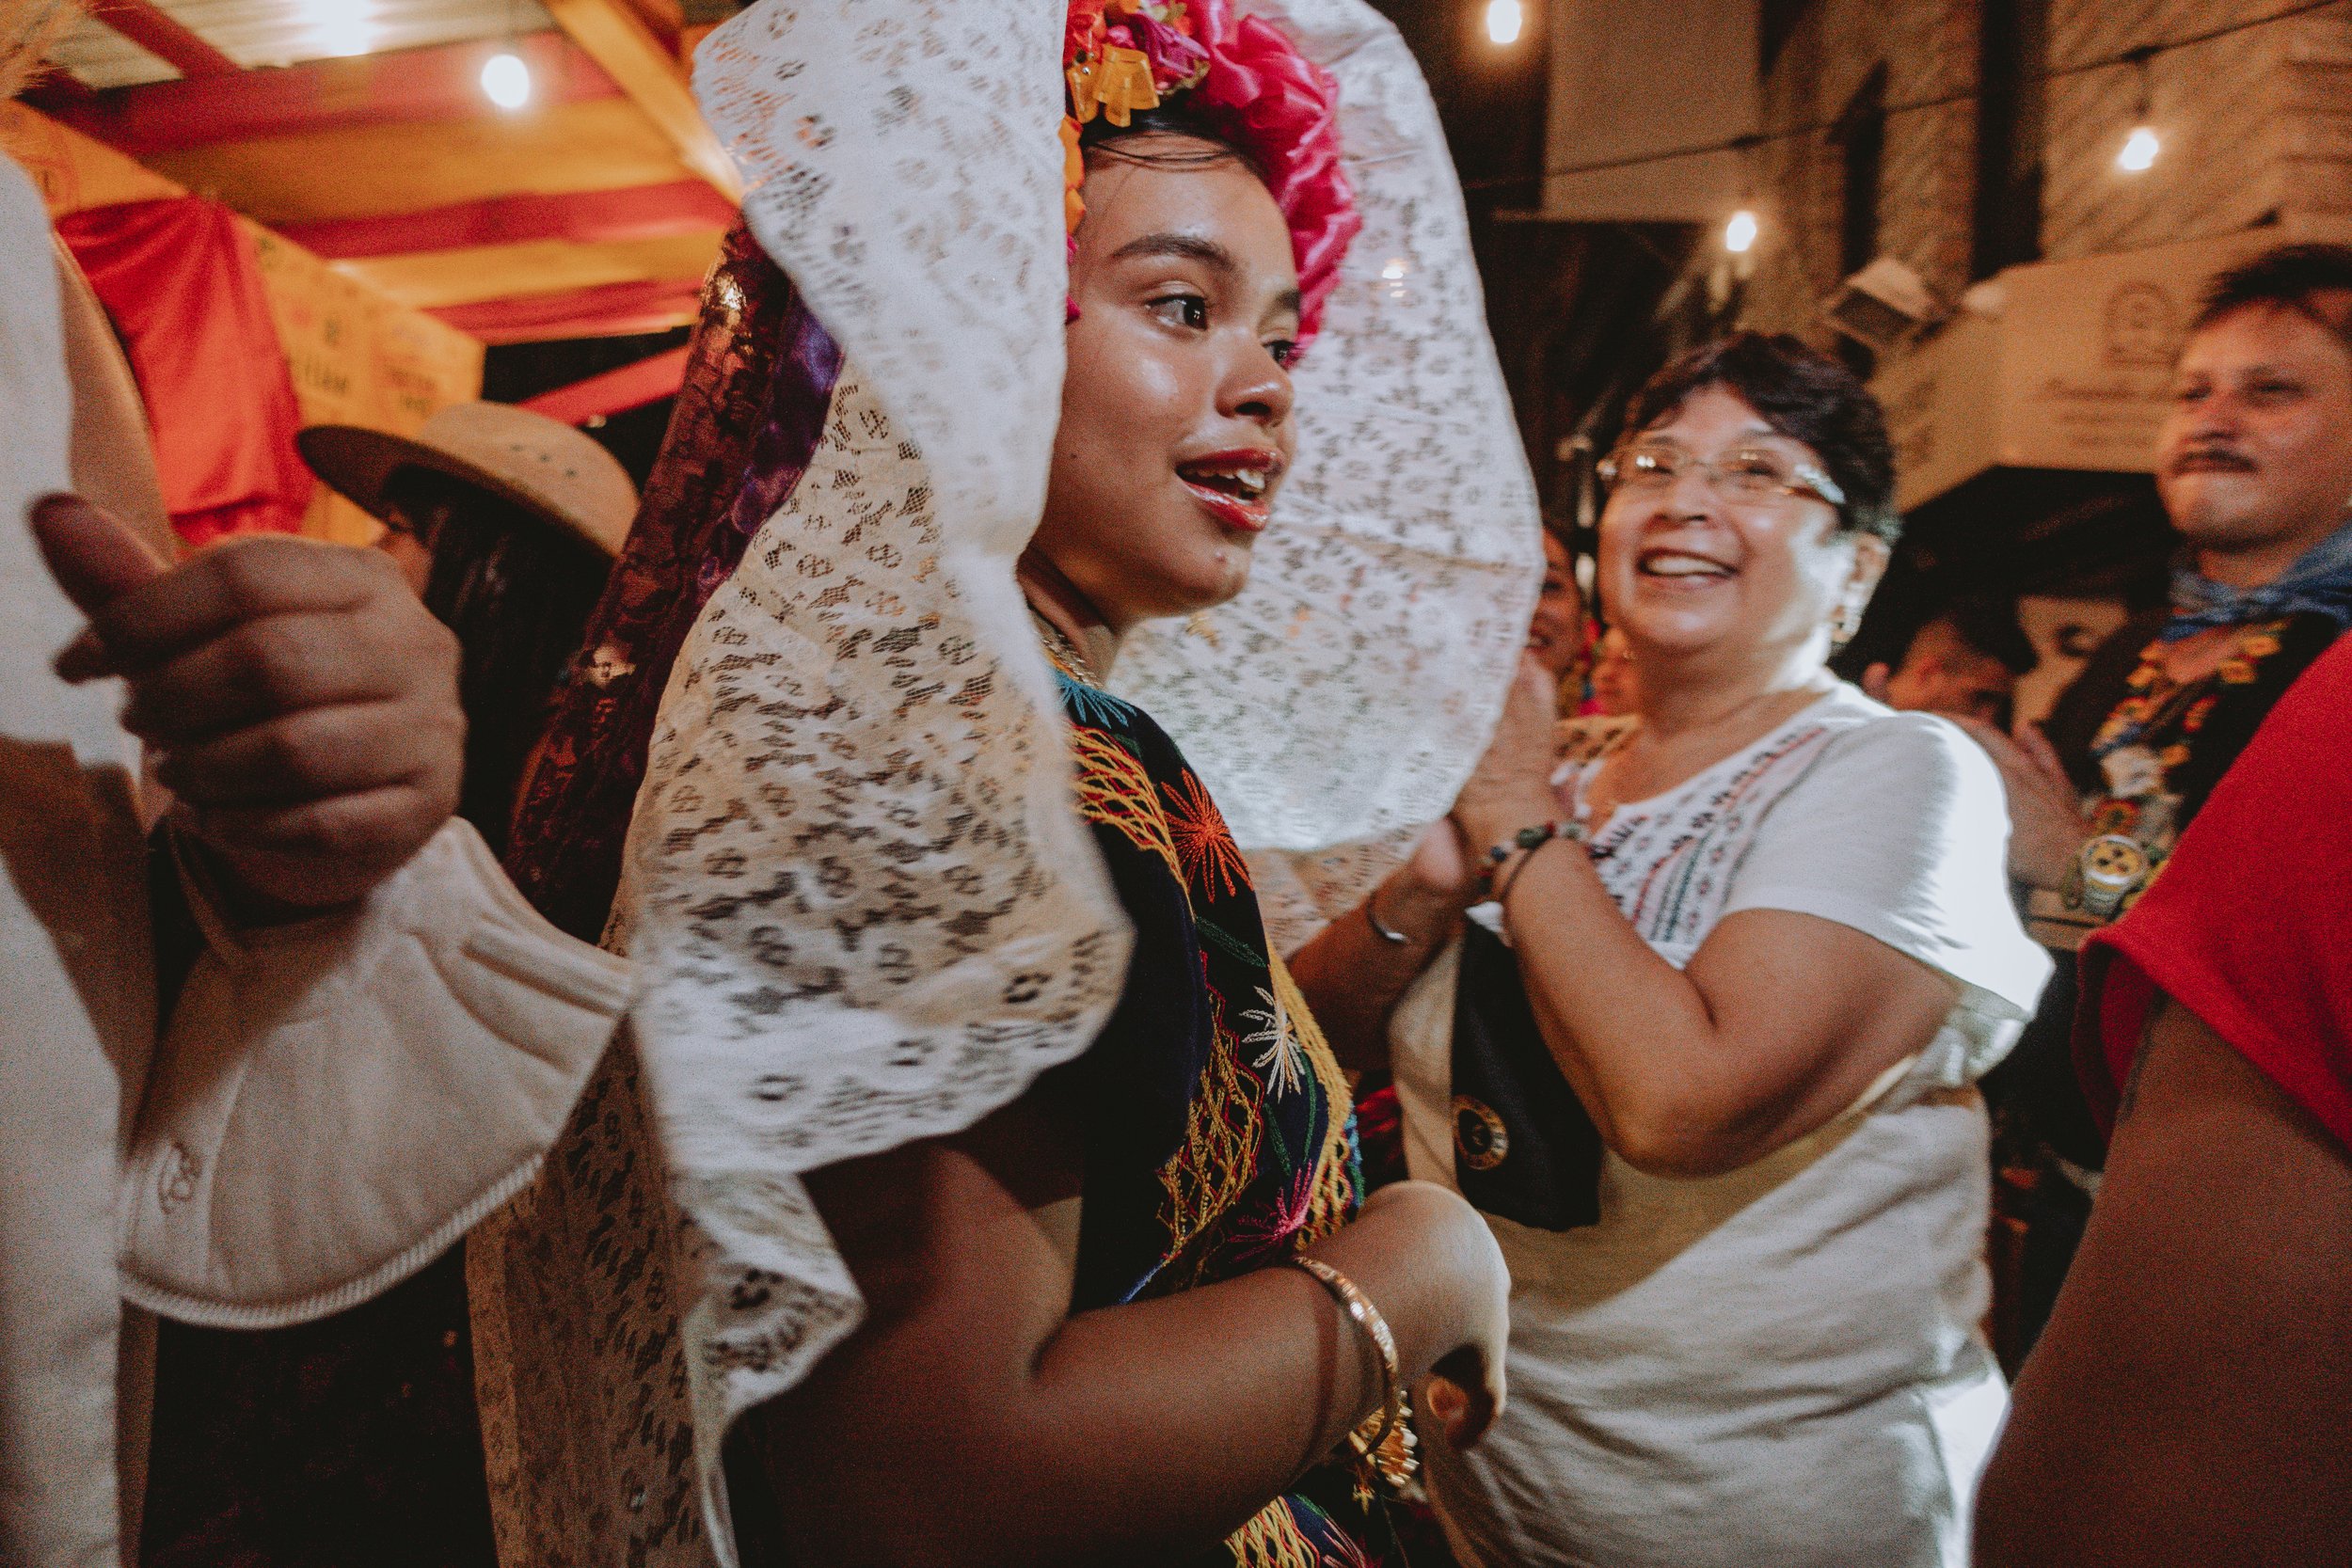  A crowd dances on the sidewalk outside of the restaurant El Kallejon in El Barrio, or East Harlem,  during Fiestas Patrias, traditional celebrations that mark the independence of Mexico from Spain on September 16, 2021.  Personal work   